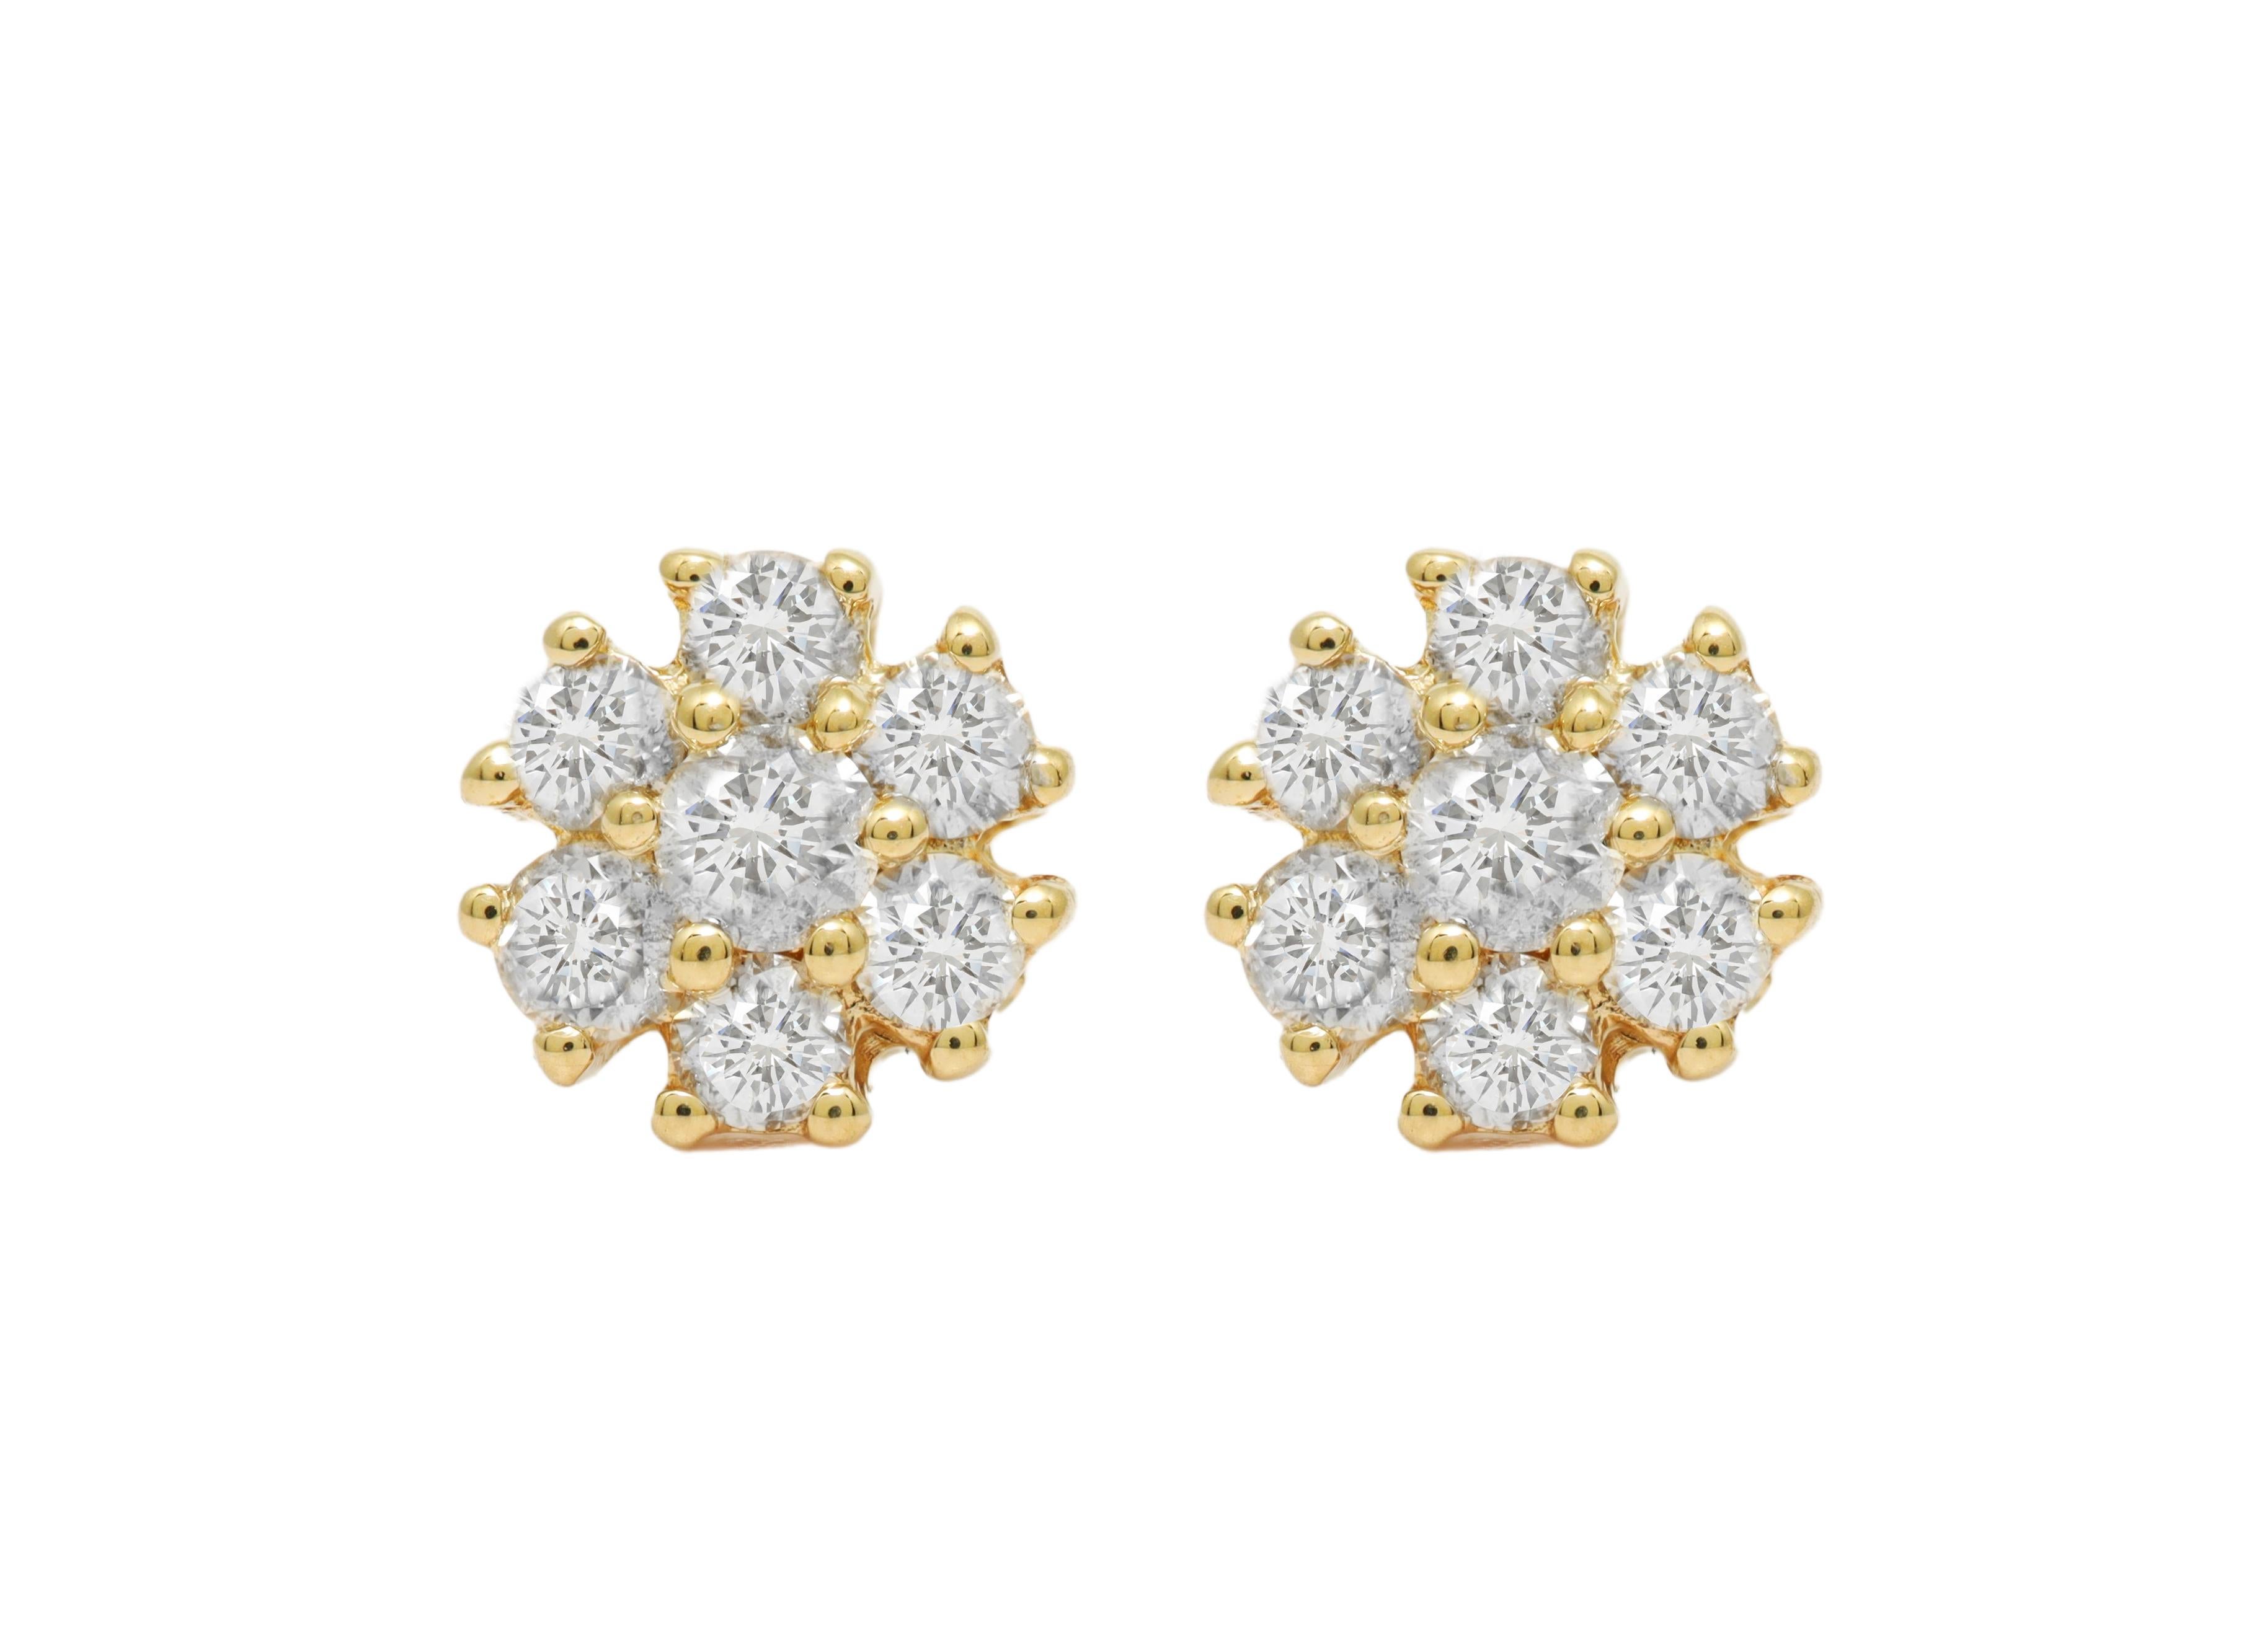 14kt yellow gold flower cluster stud earrings containing 0.50 cts tw (FG SI)
Diana M. is a leading supplier of top-quality fine jewelry for over 35 years.
Diana M is one-stop shop for all your jewelry shopping, carrying line of diamond rings,